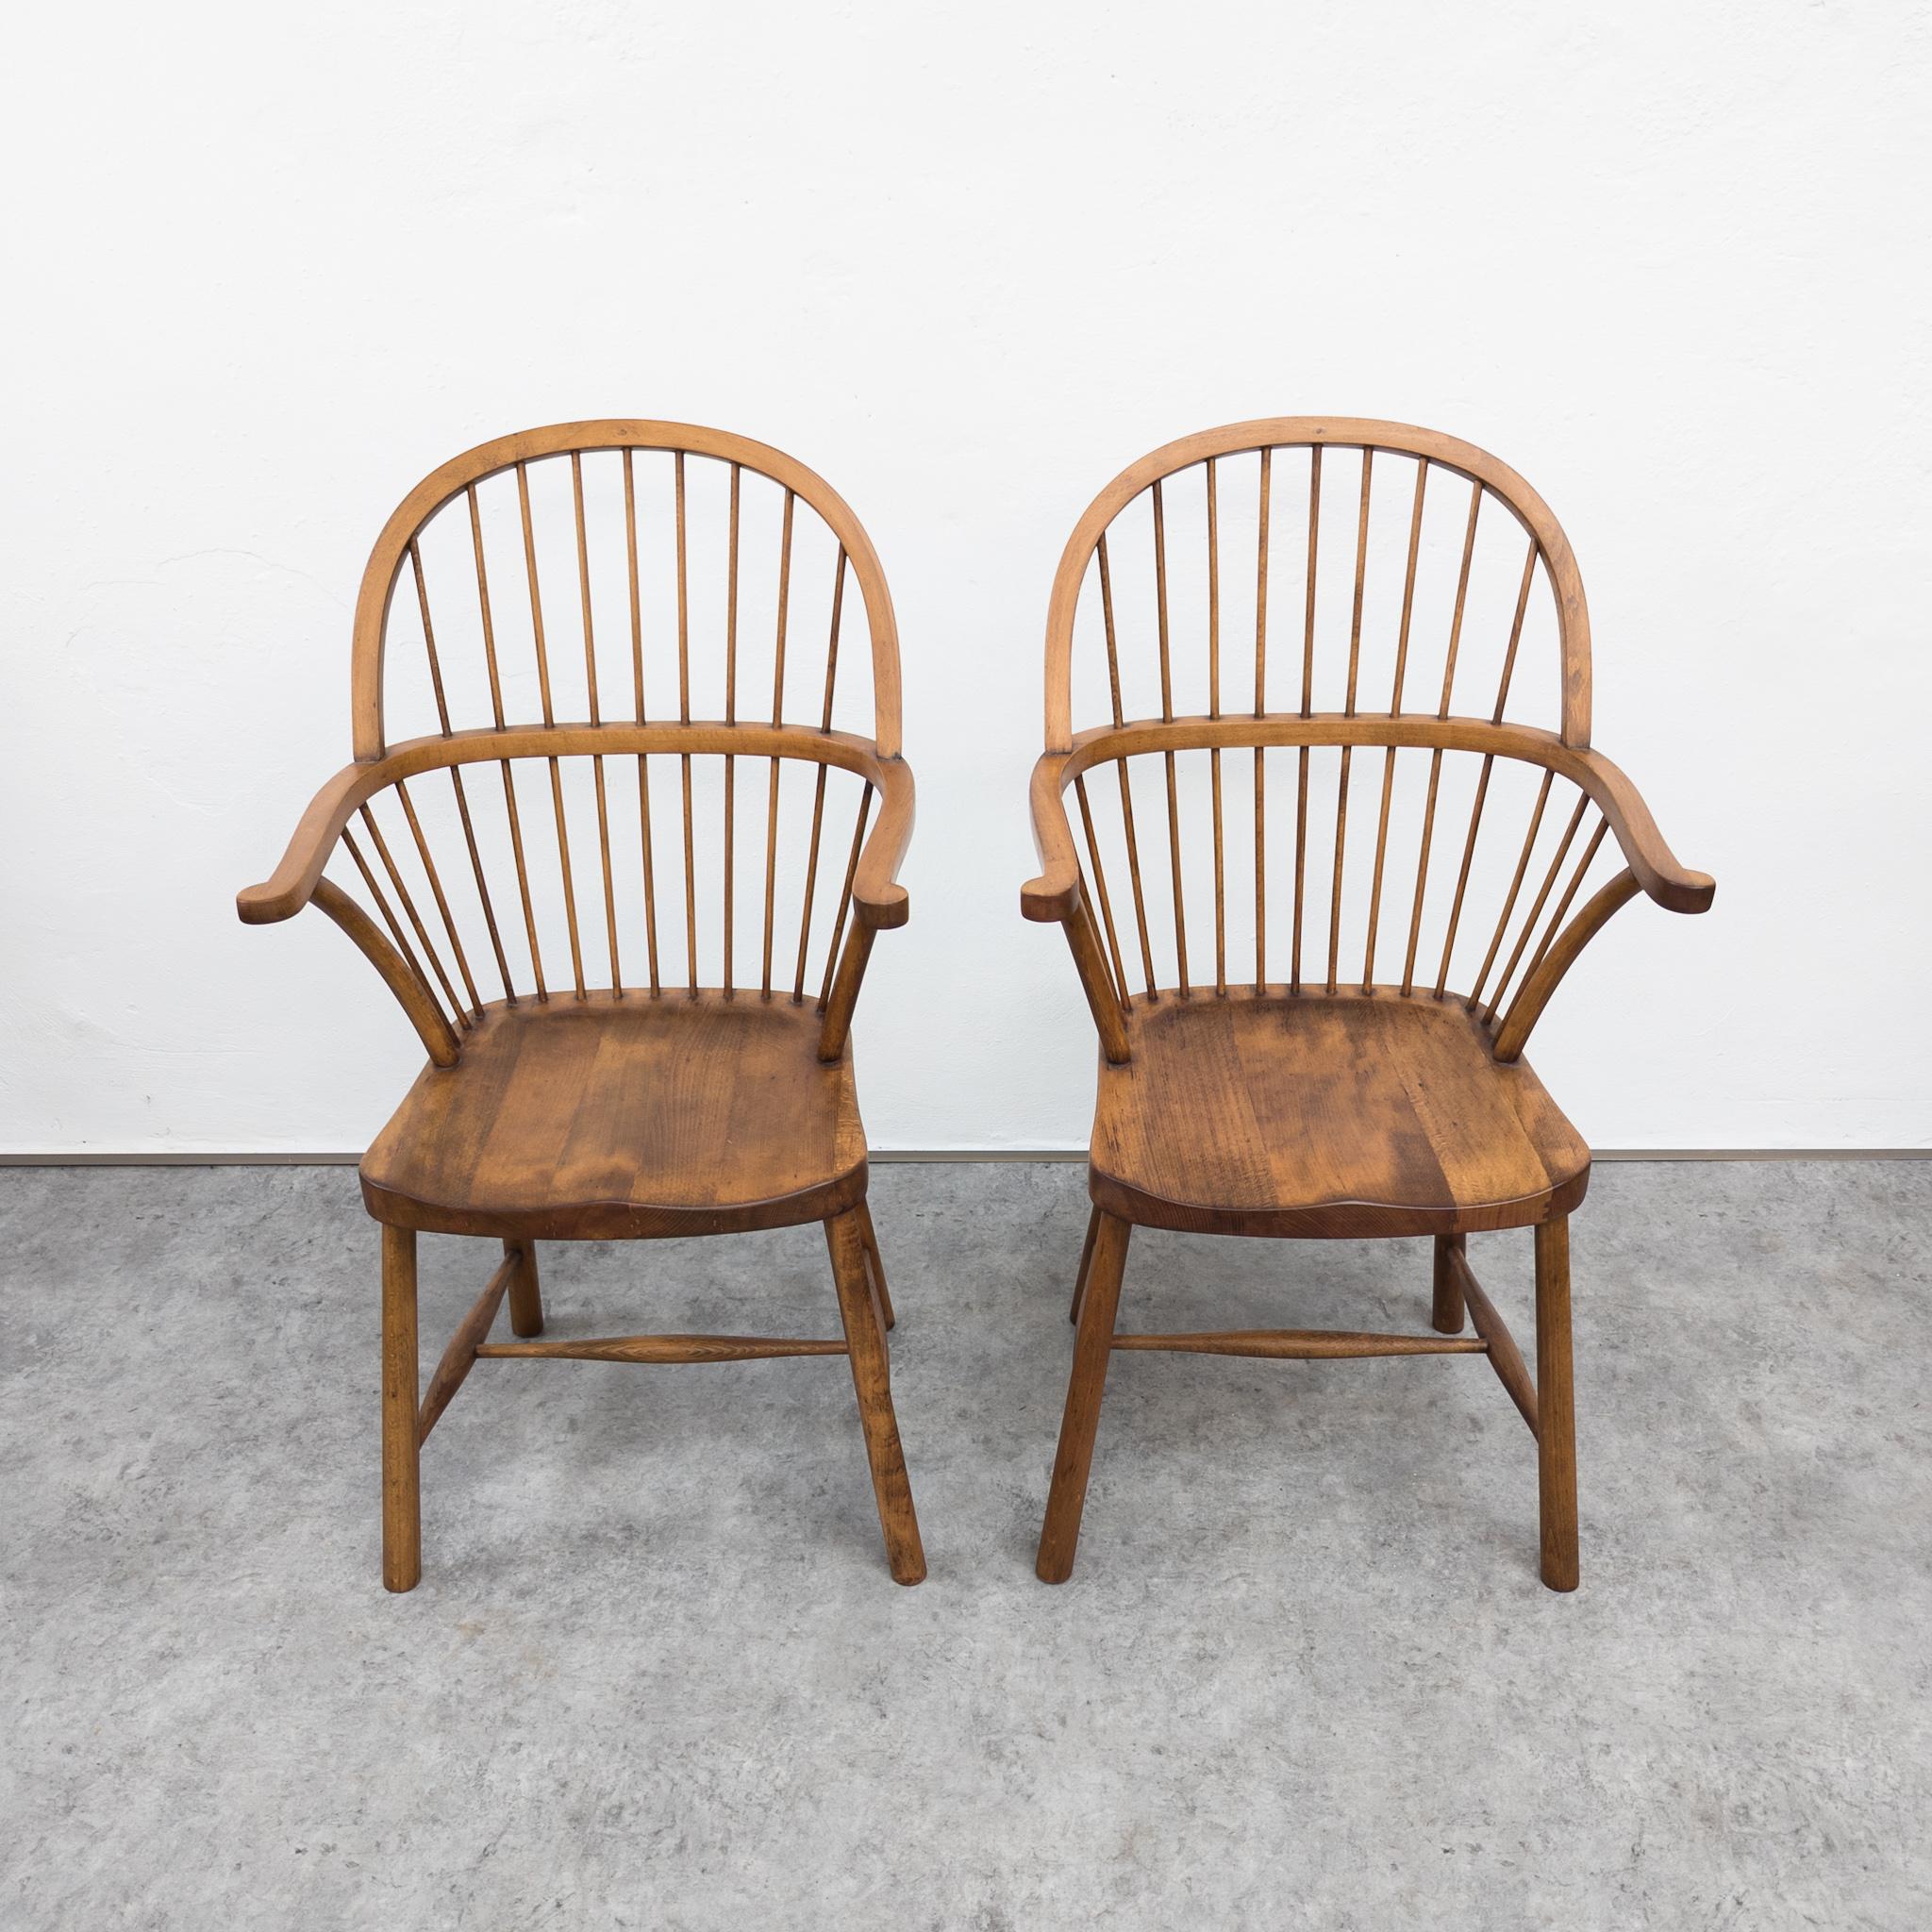 Extremely rare beech wood Windsor-style chairs by Loos Adolf (1870–1933), manufactured by Gebrüder Thonet. Stamped by company trade mark. The authorship attributed to A. Loos in 1903 (chairs used eg. in the interior of his own apartment. Expertly